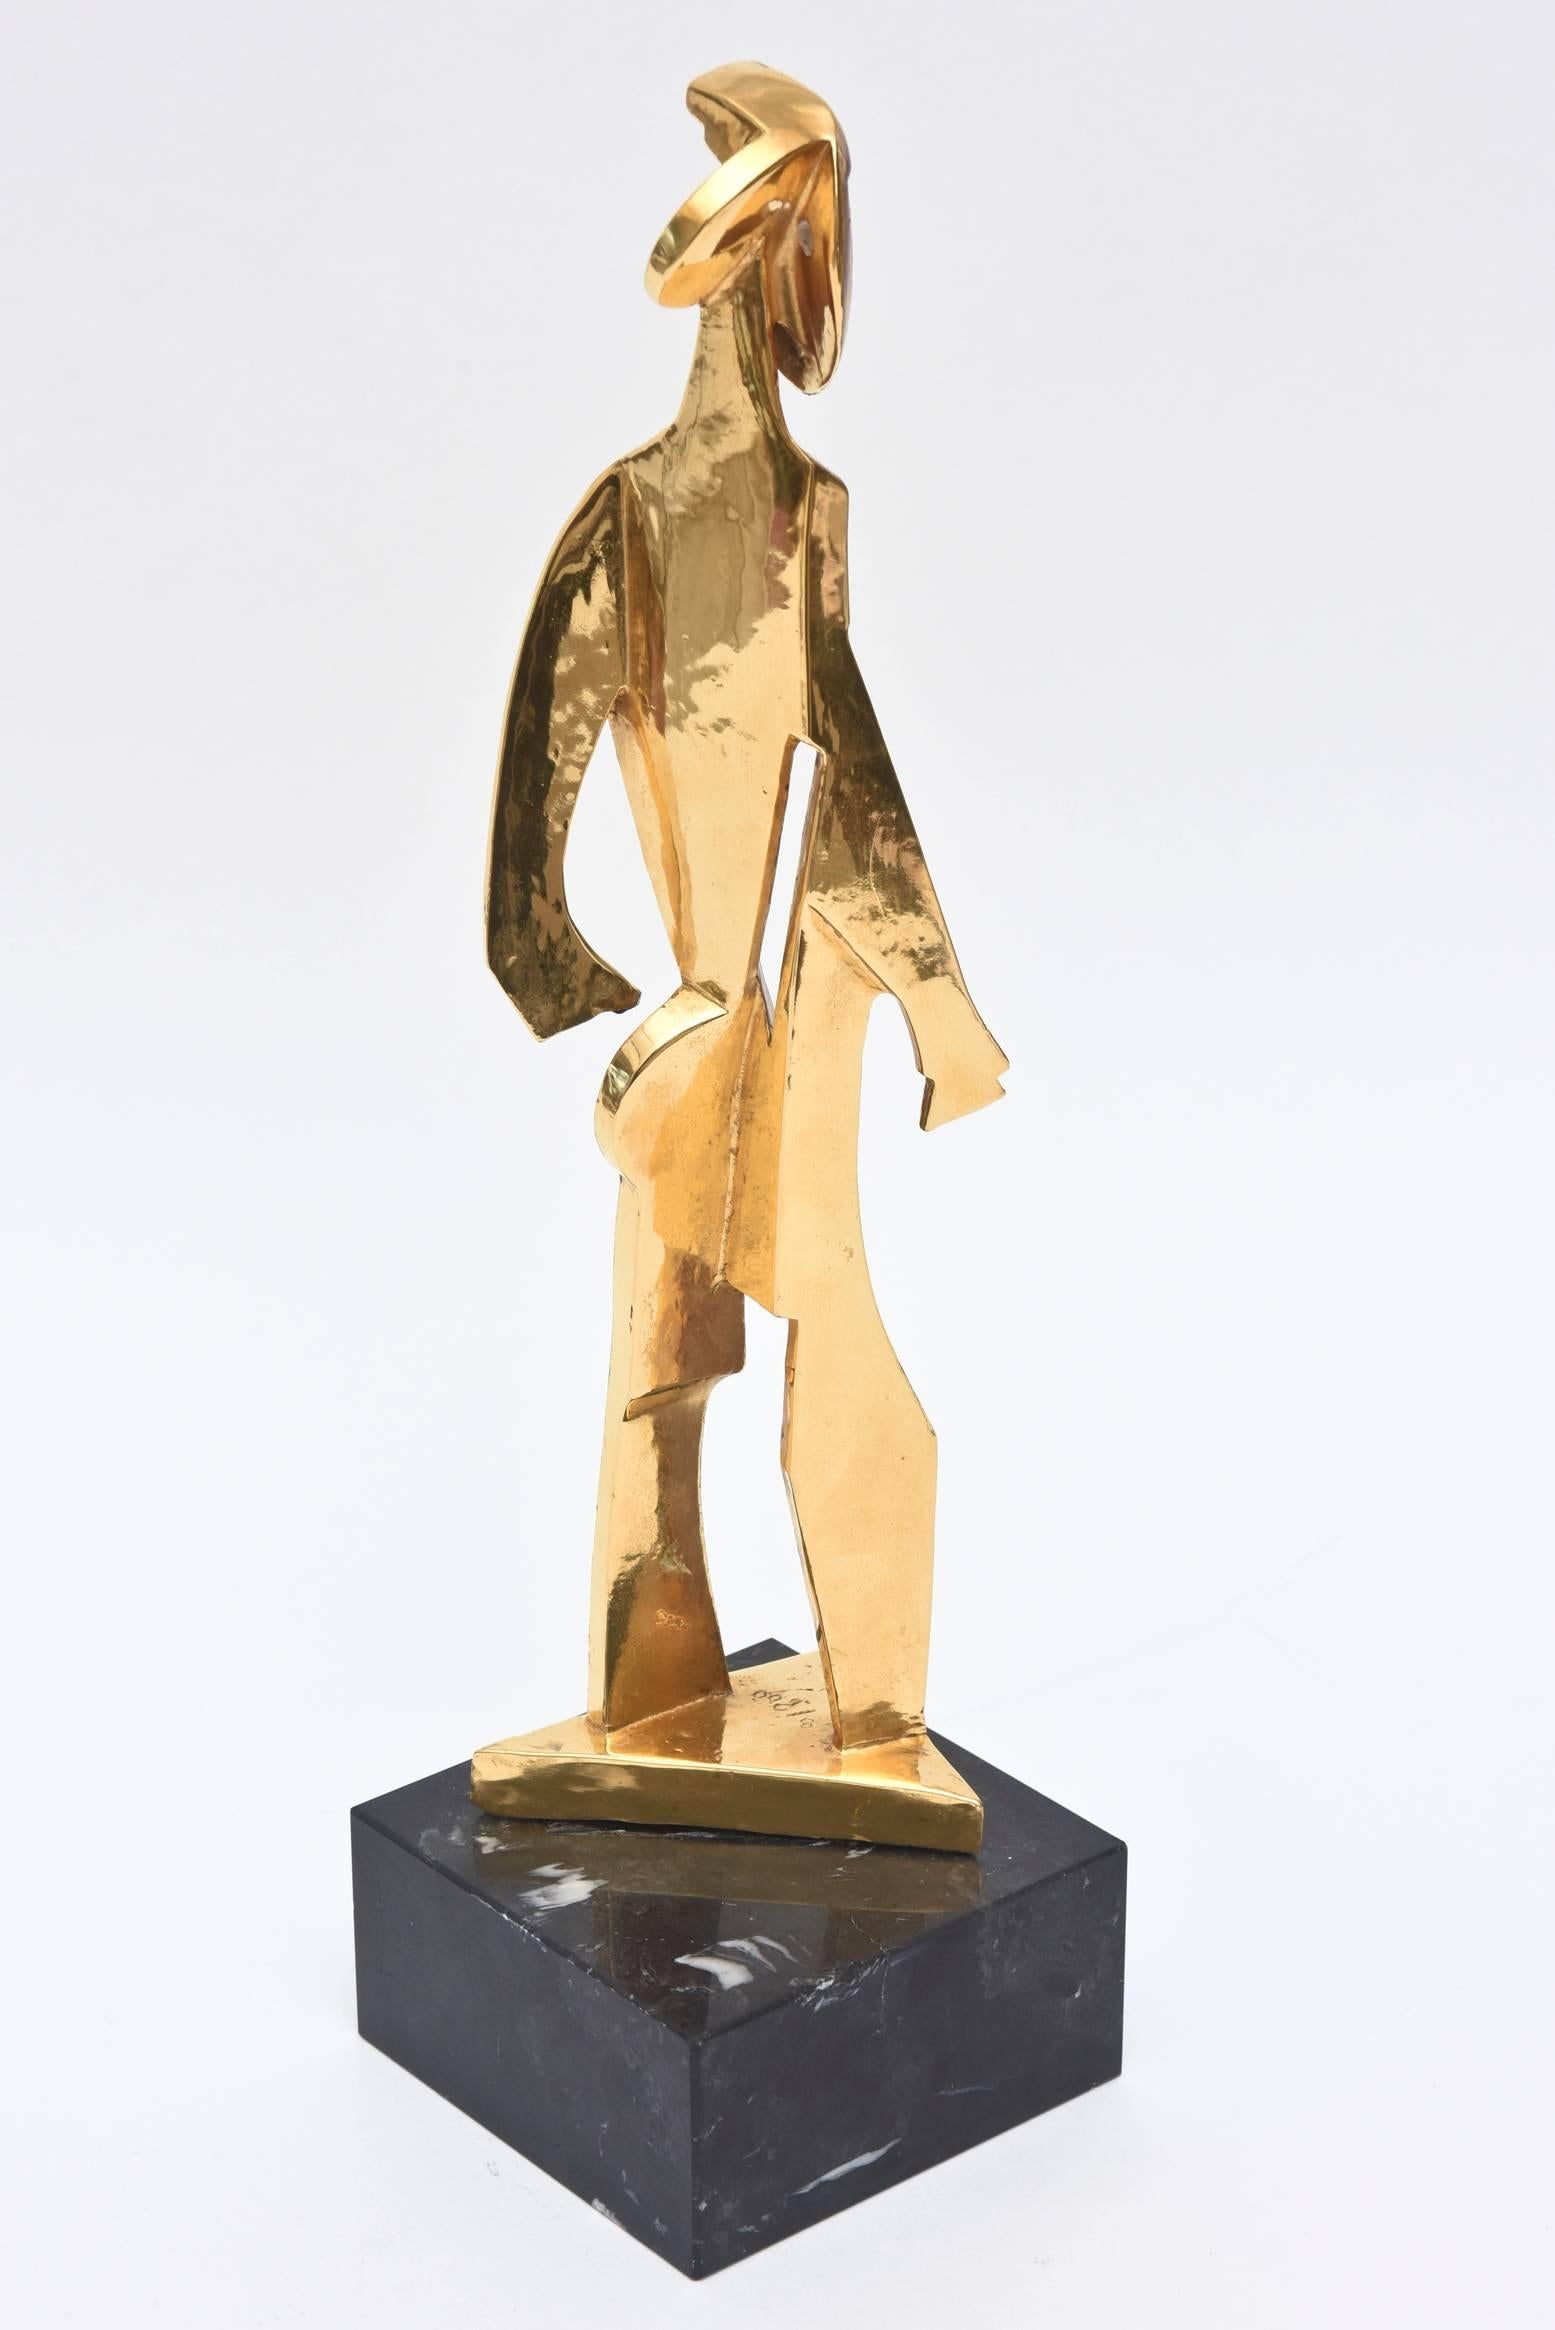 Art Deco Signed James King Gold Plated Metal Cubist Sculpture on Marble Base